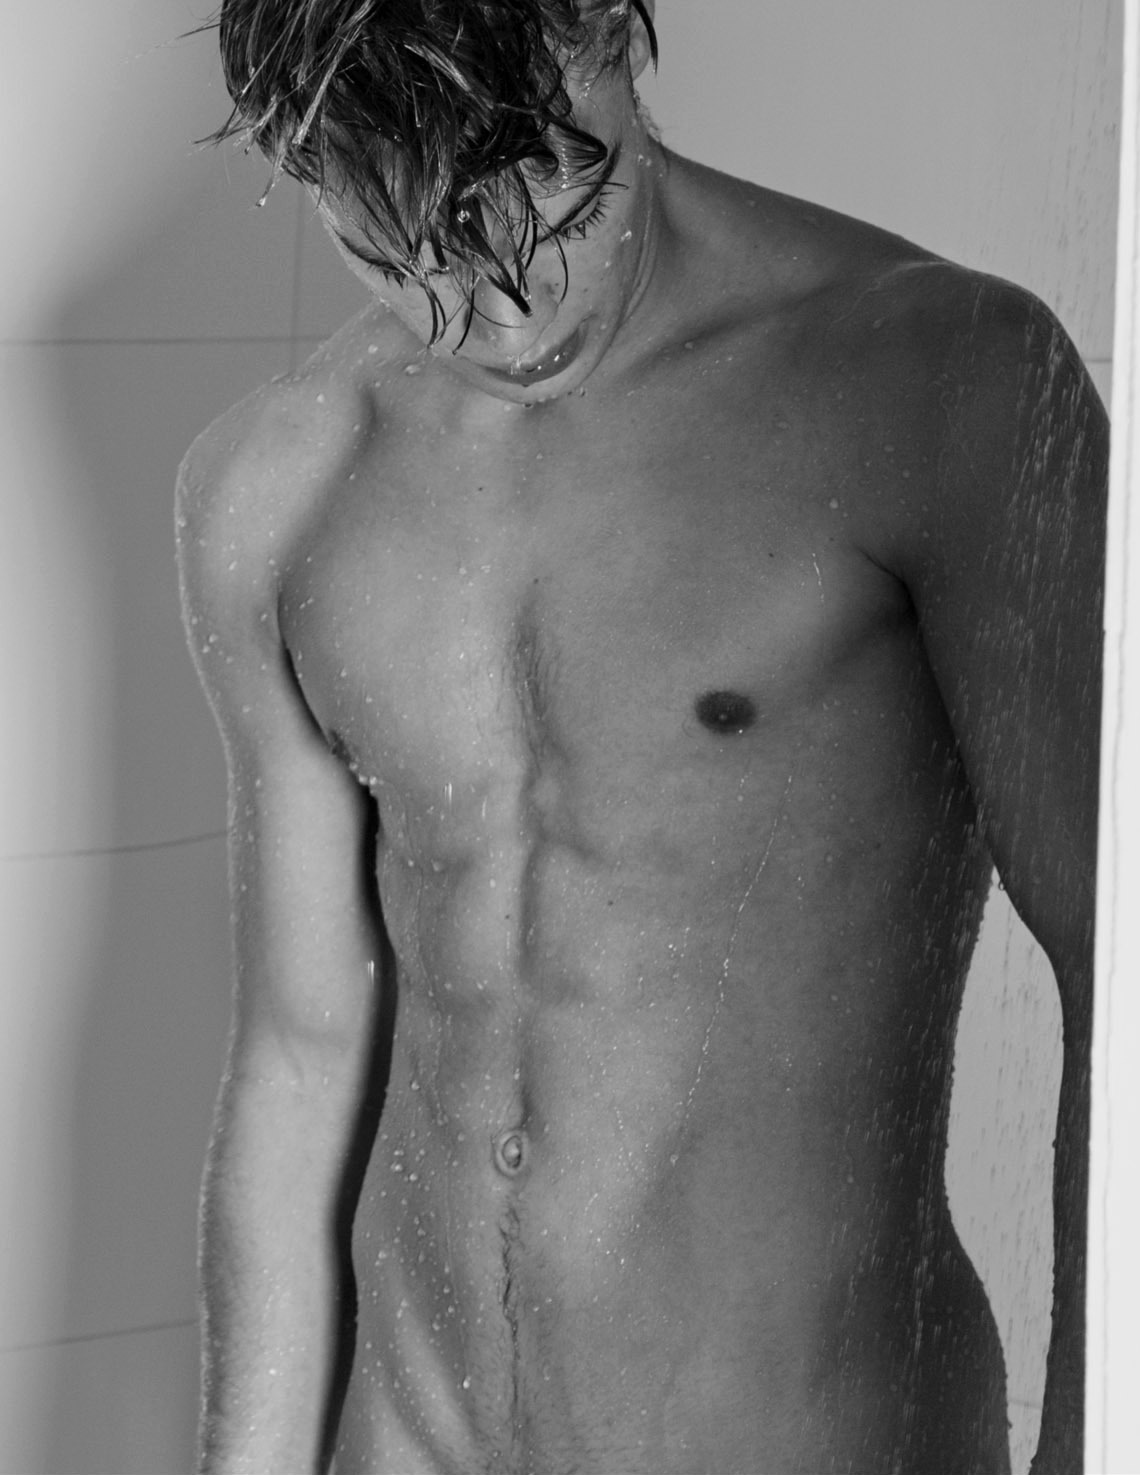 takingoff38:
“Taking Off:
The Shower Series, #495.
Click, reblog and follow. Pass me around to all your friends.
”
A